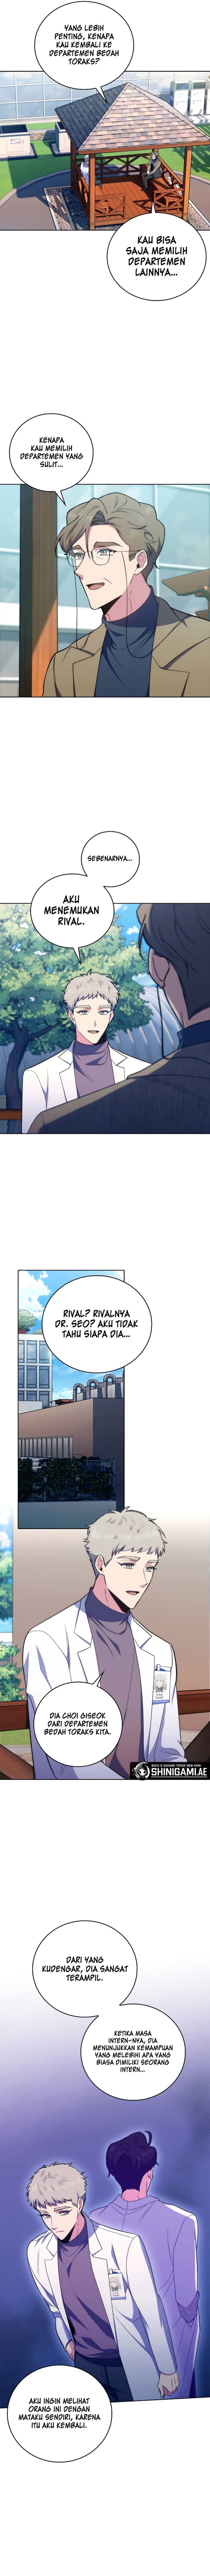 Level-up Doctor Chapter 85